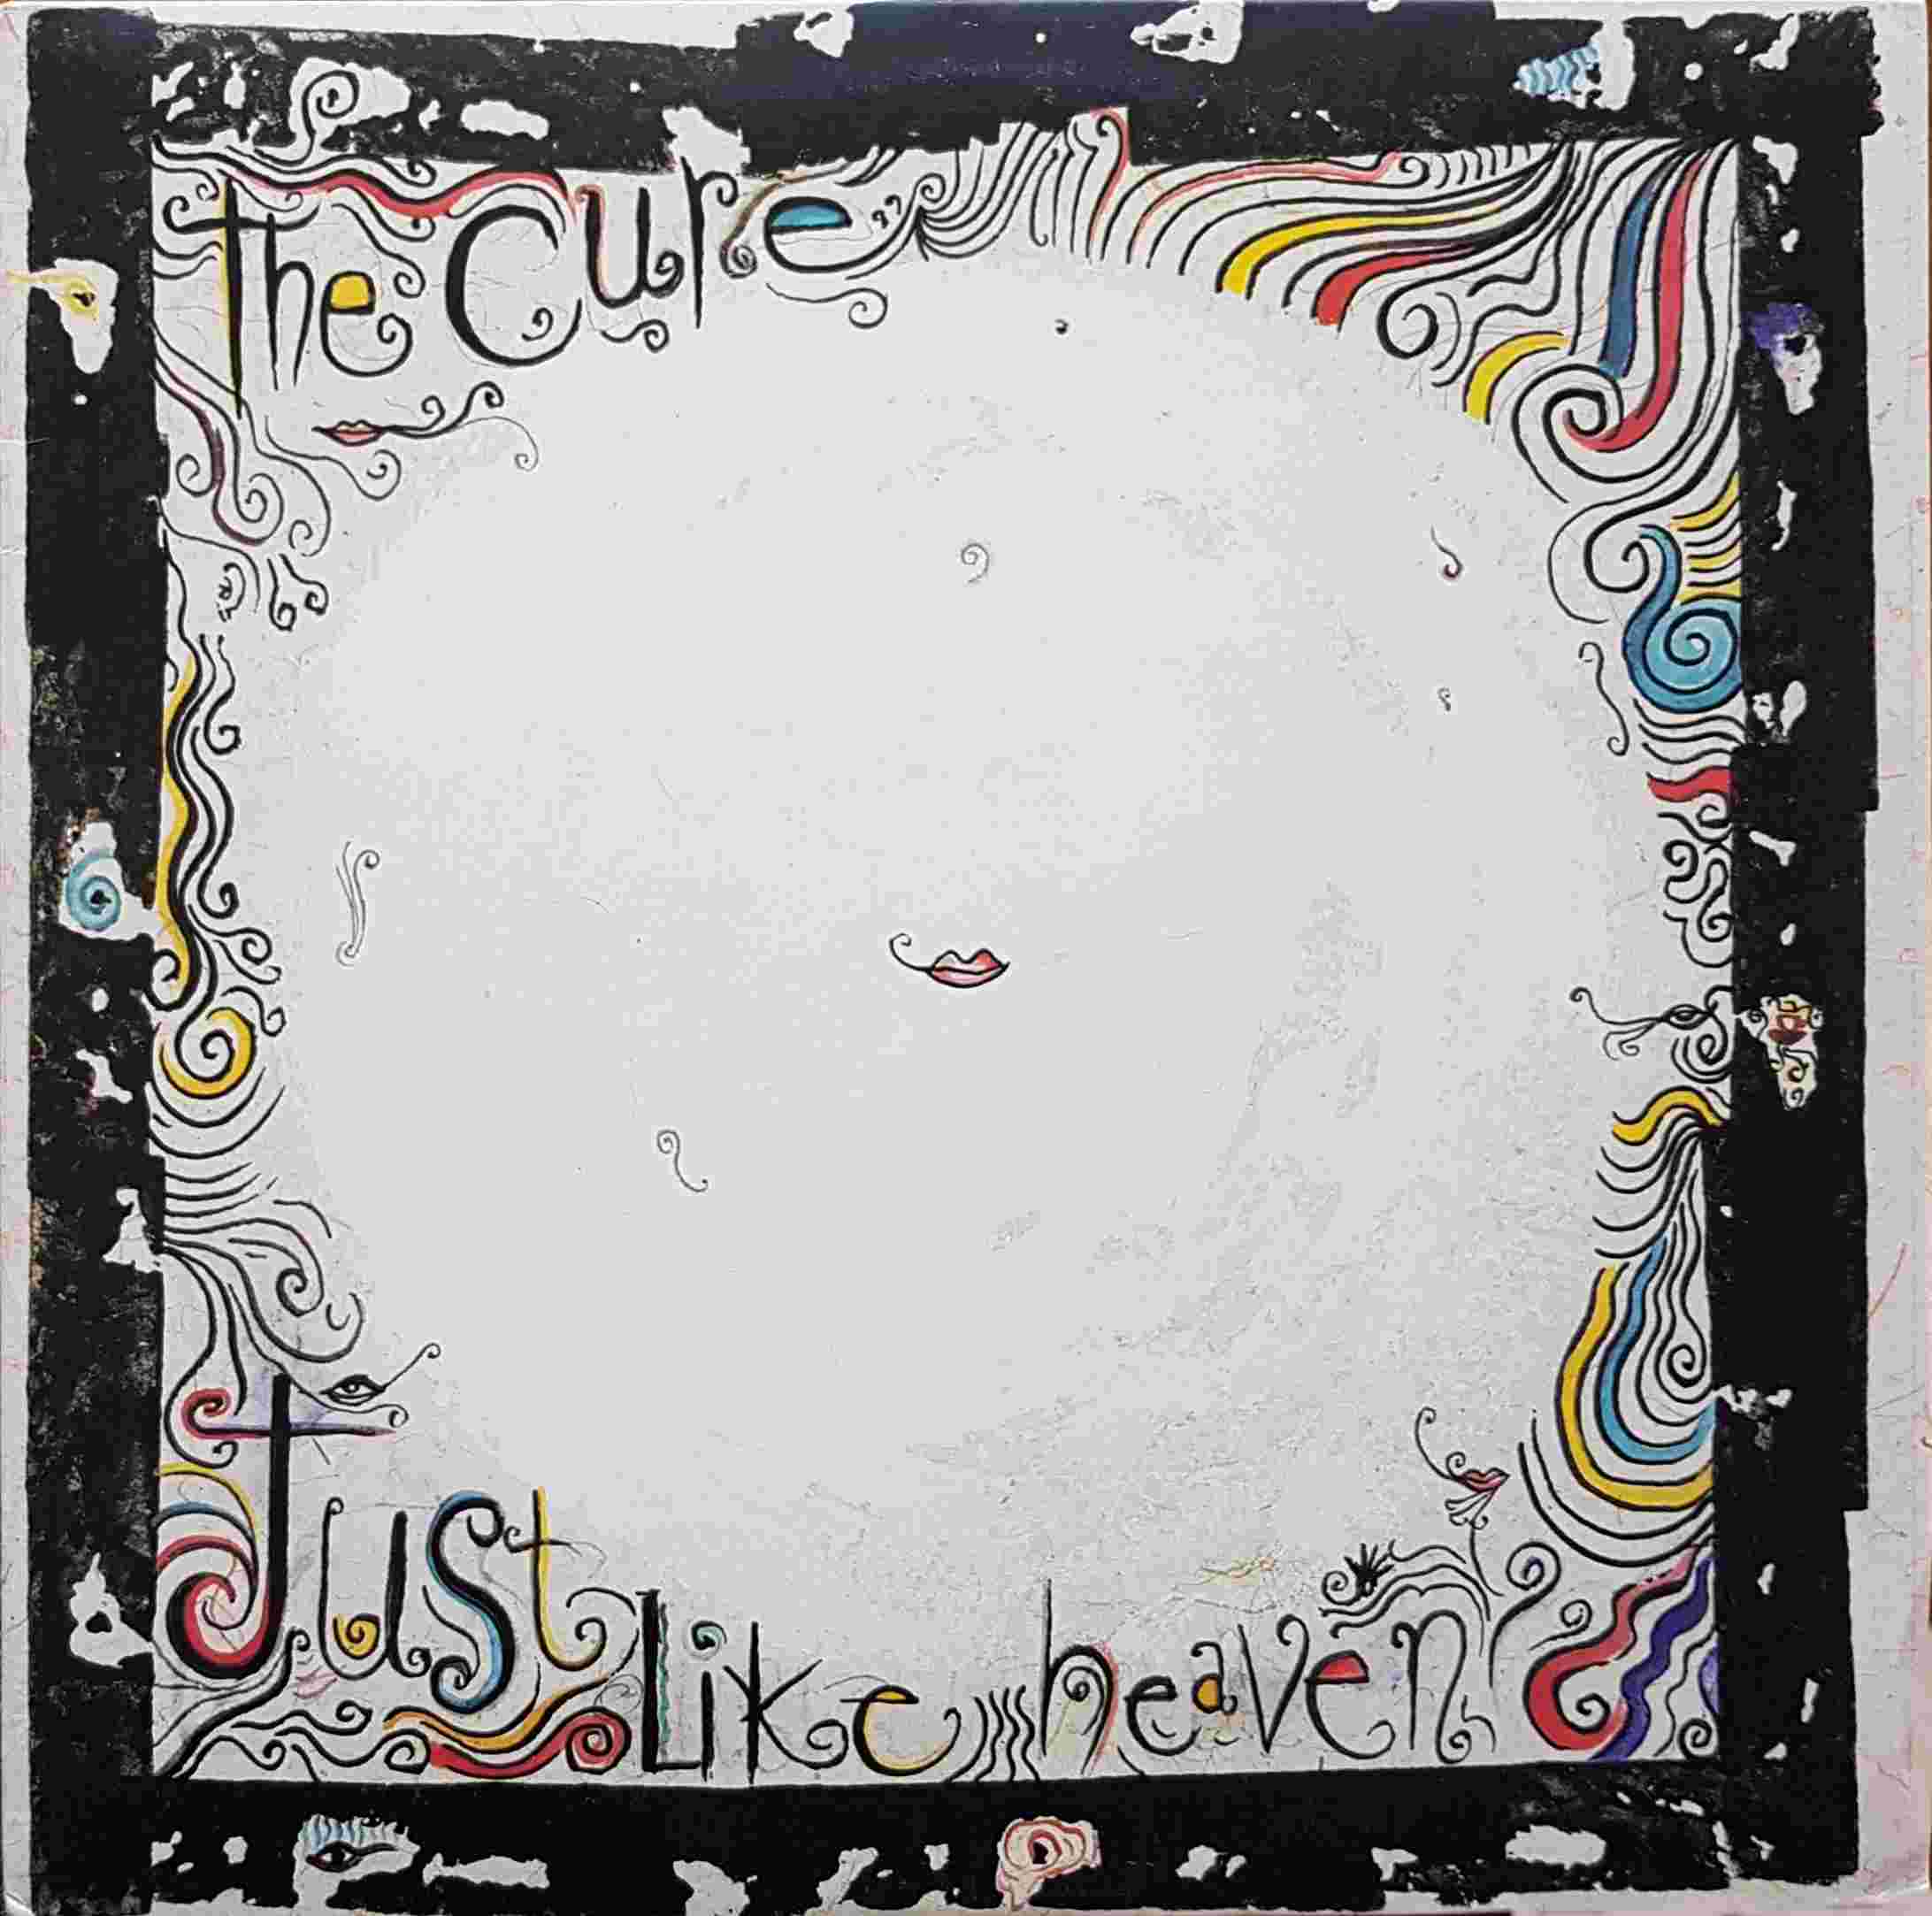 Picture of Just like Heaven by artist The Cure  